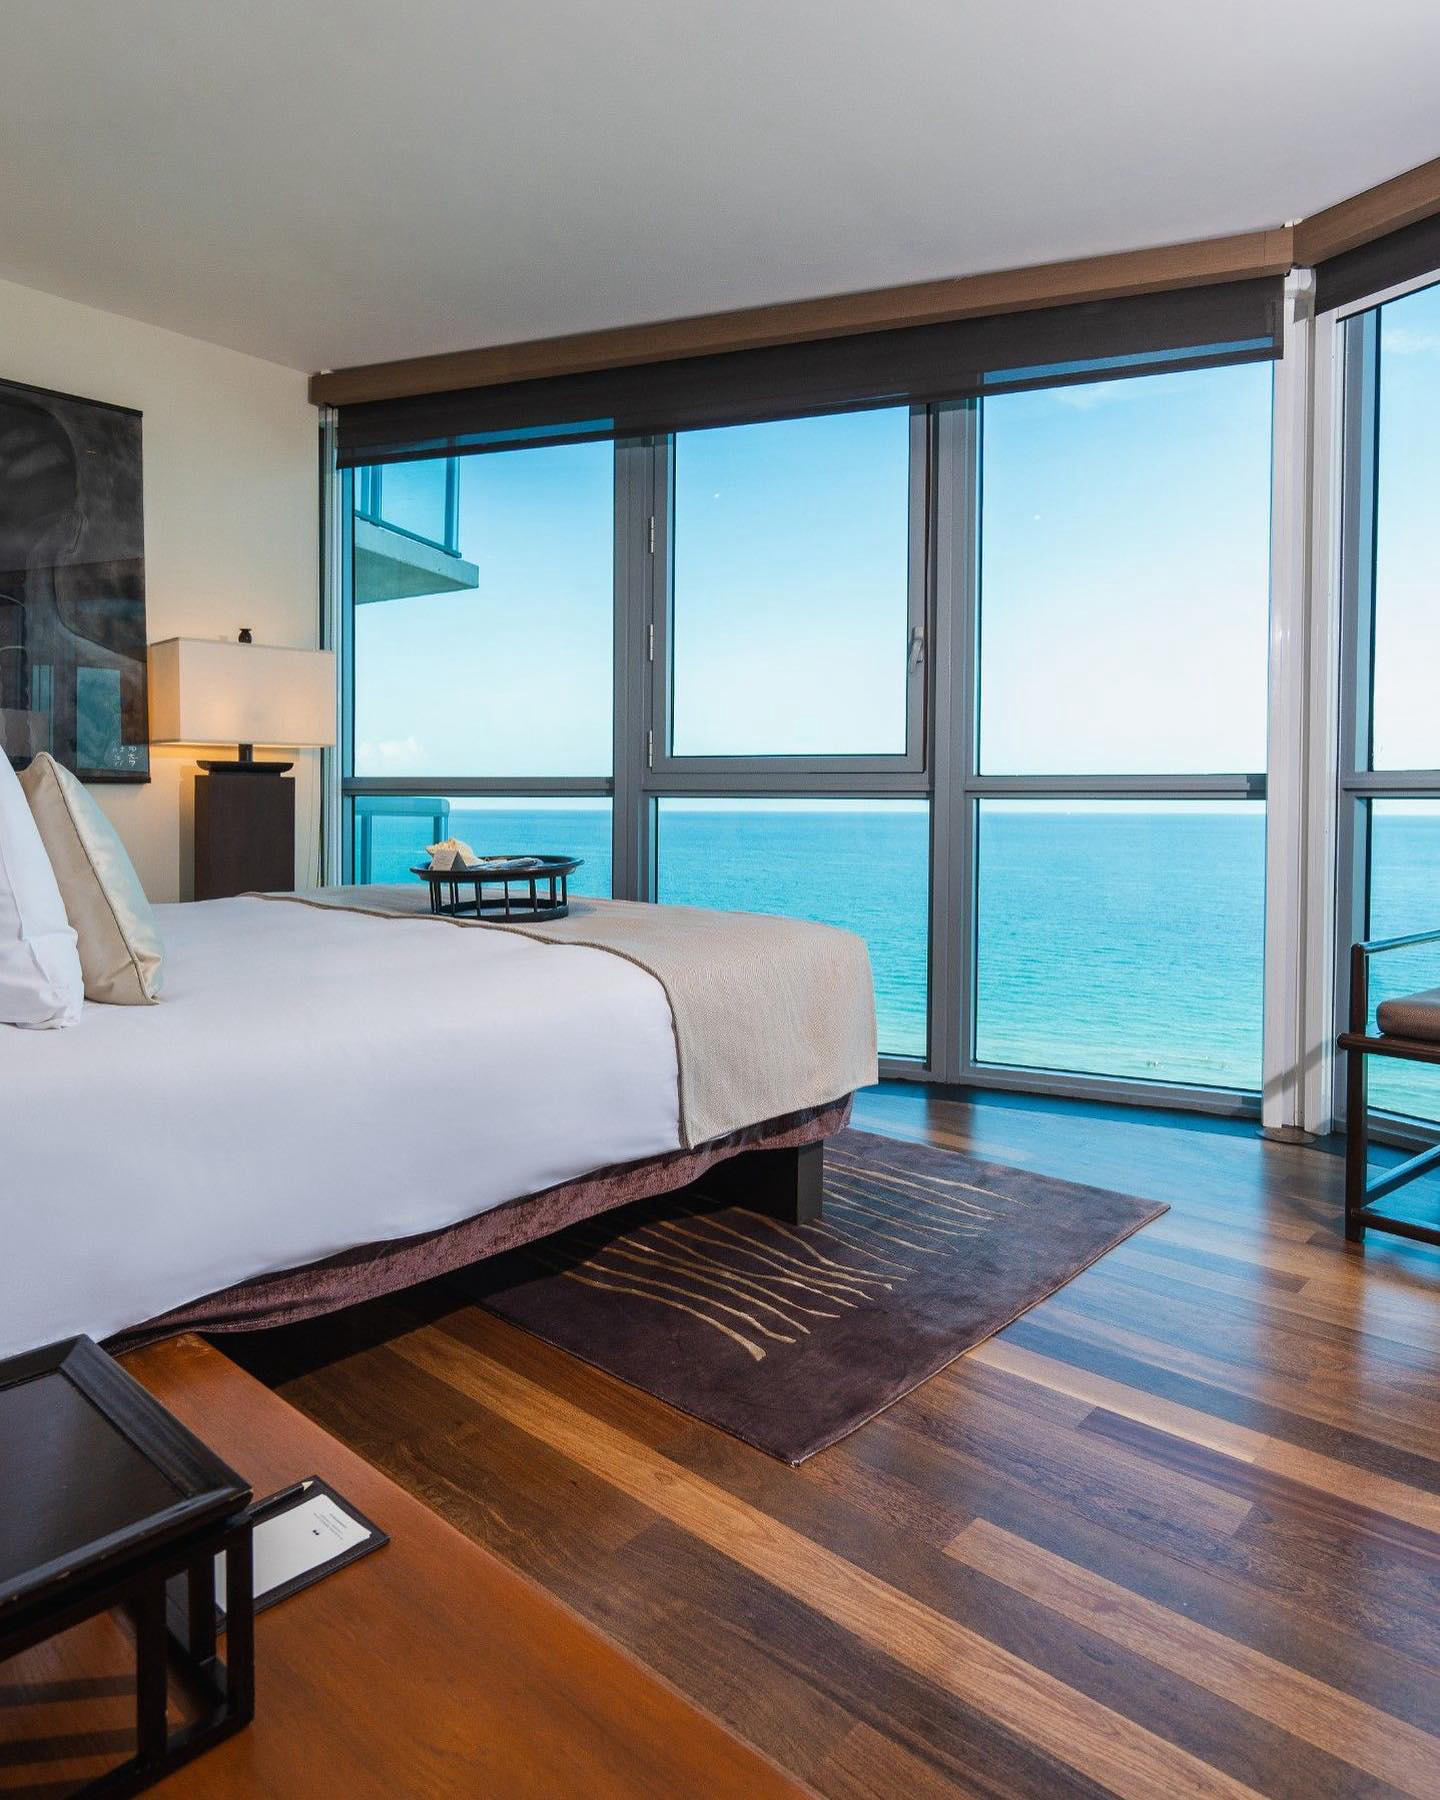 The Setai, Miami Beach - Wake up to cerulean skies and endless views of the Atlantic Ocean from the